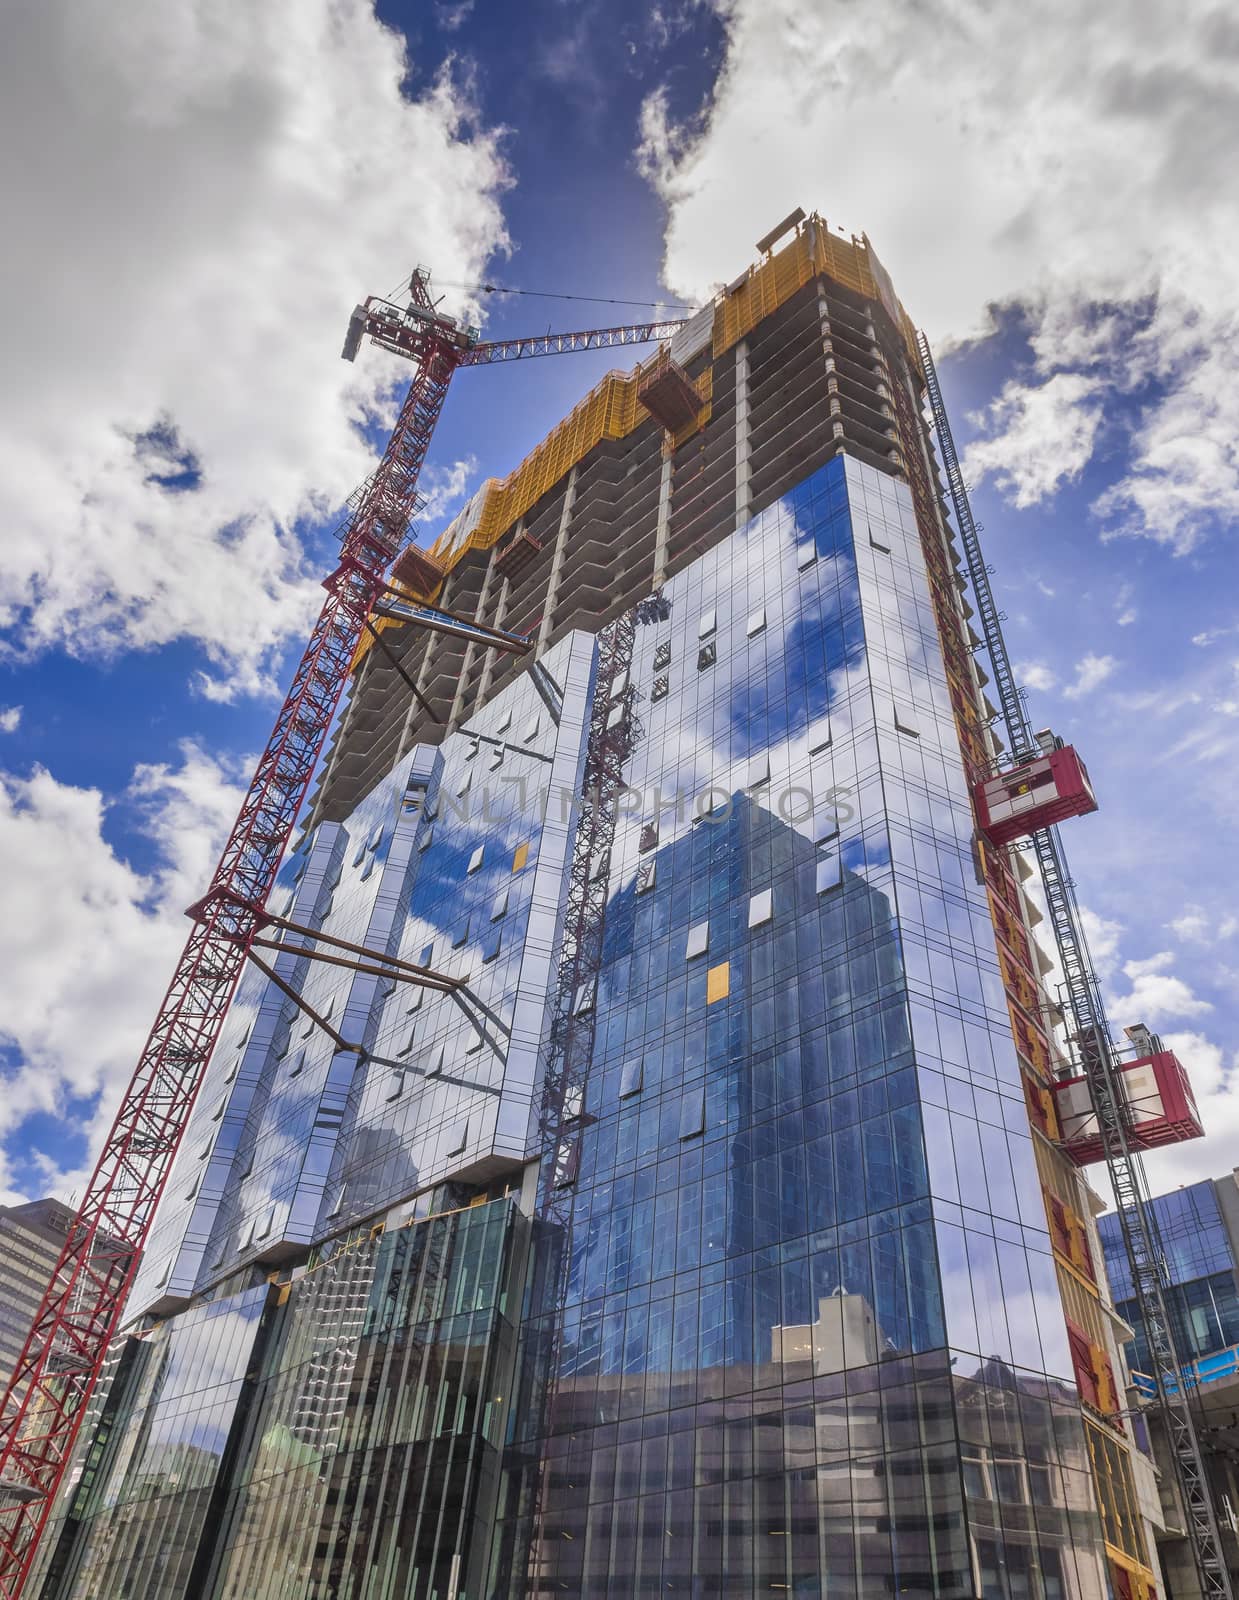 Construction site of new glass skyscraper with cranes on sky background